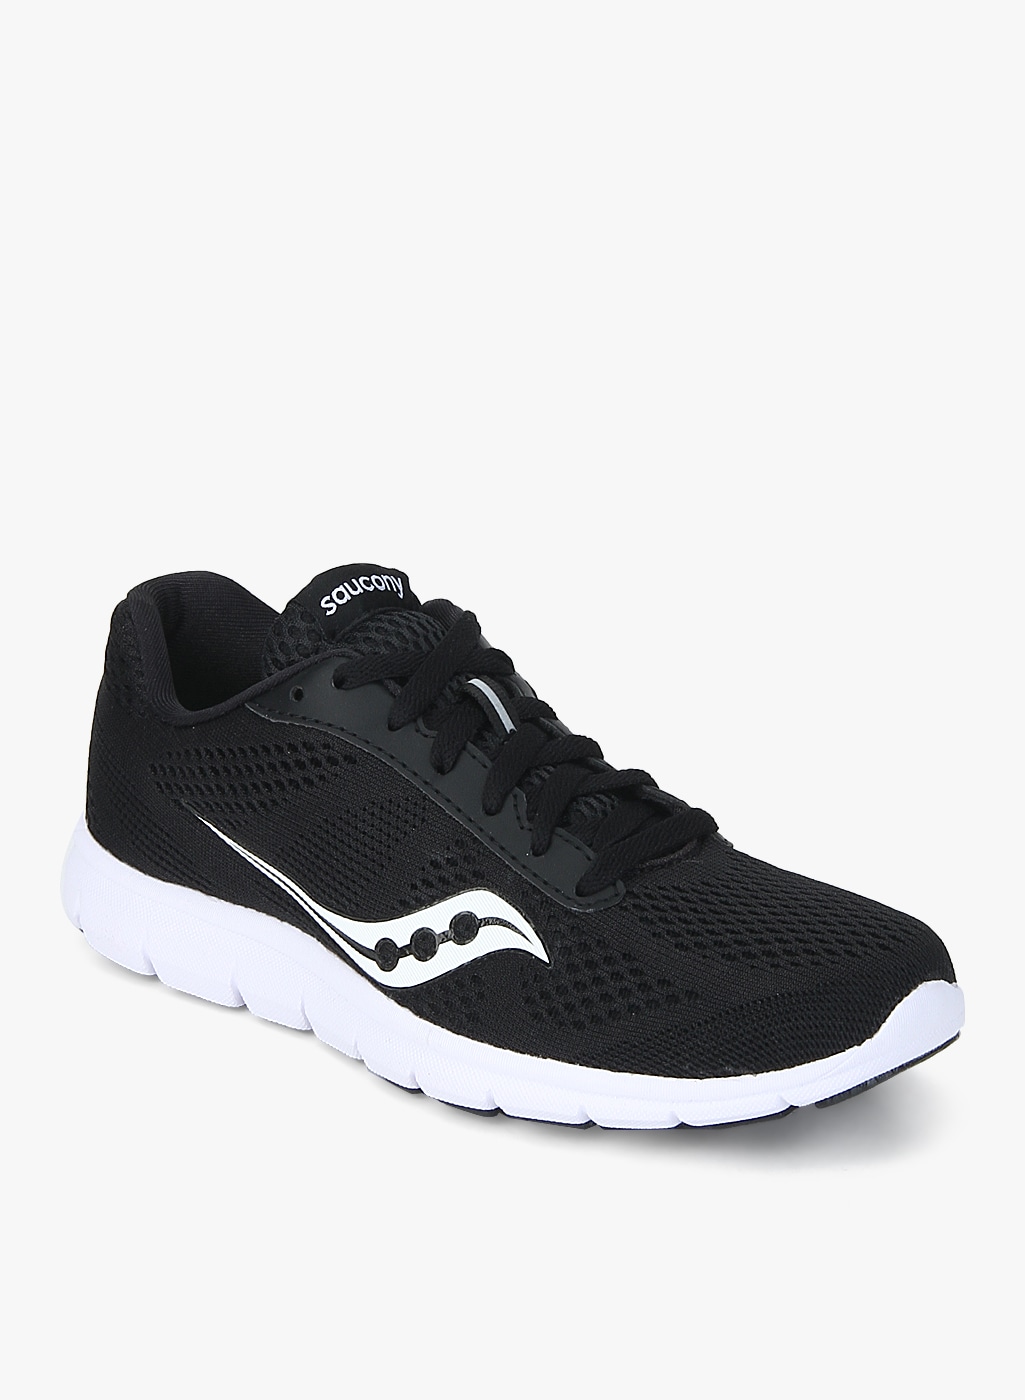 saucony Grid Ideal Black Running Shoes 